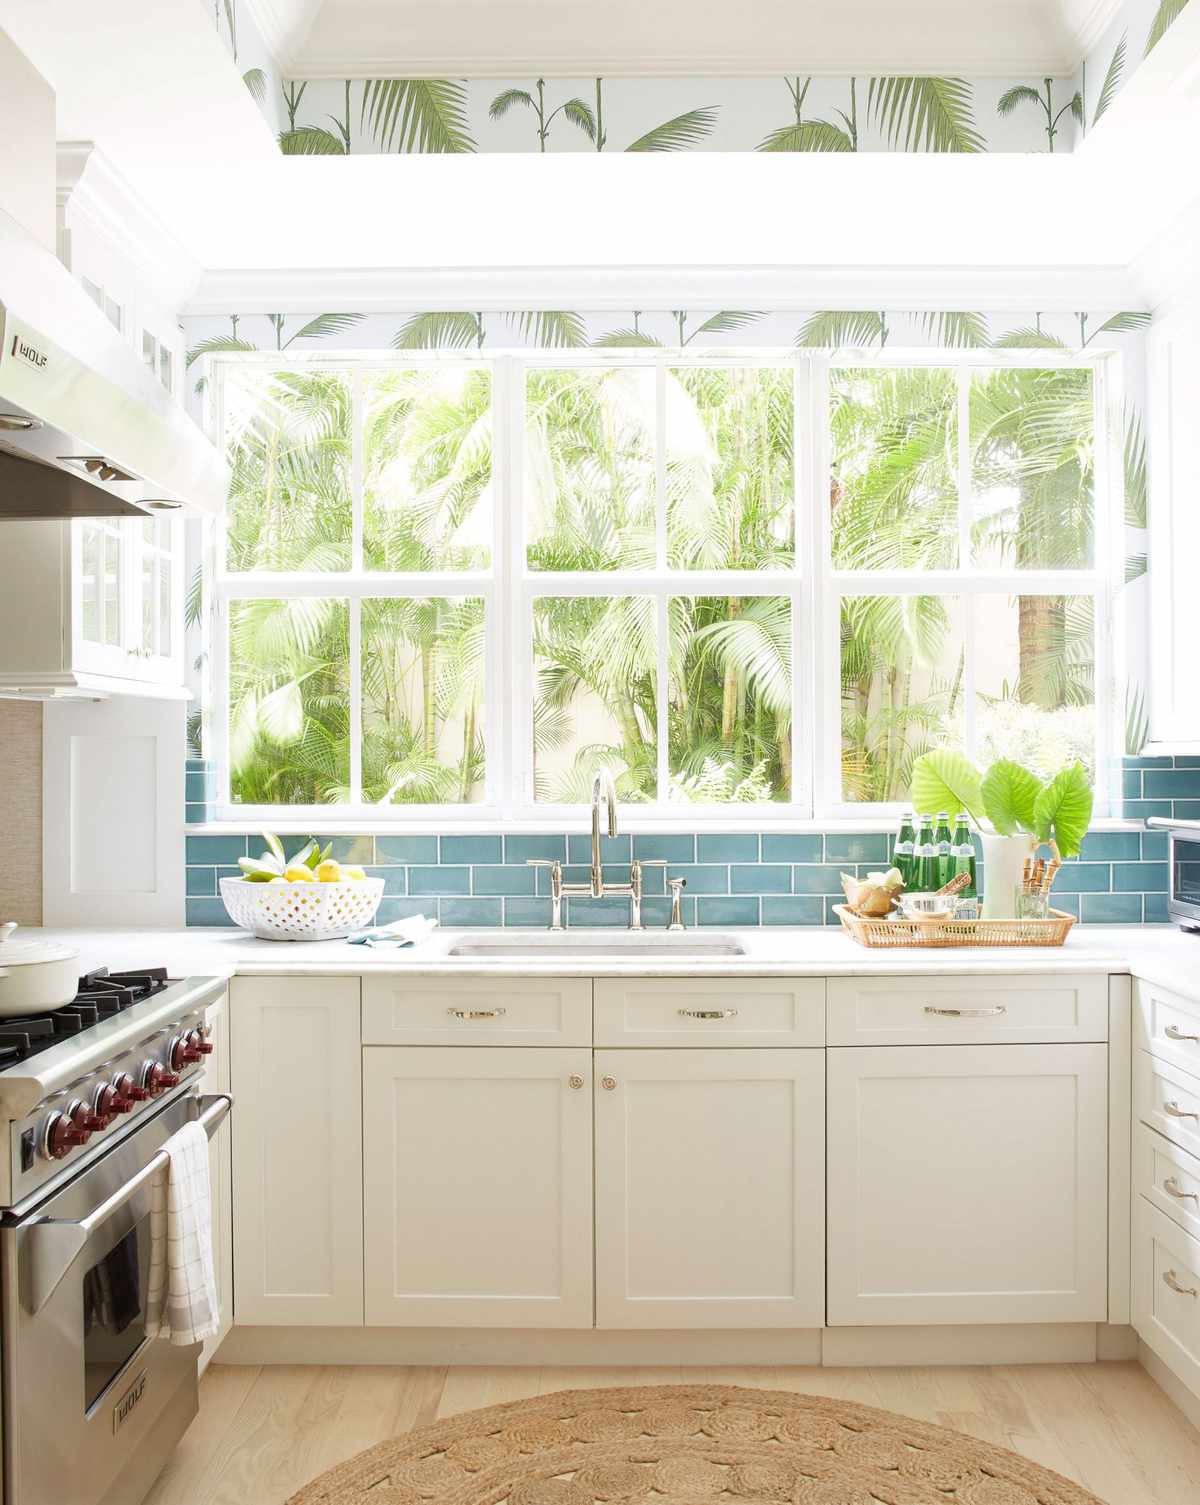 18 Paint Color Trends We're Loving for Kitchen Cabinets in 18 ...